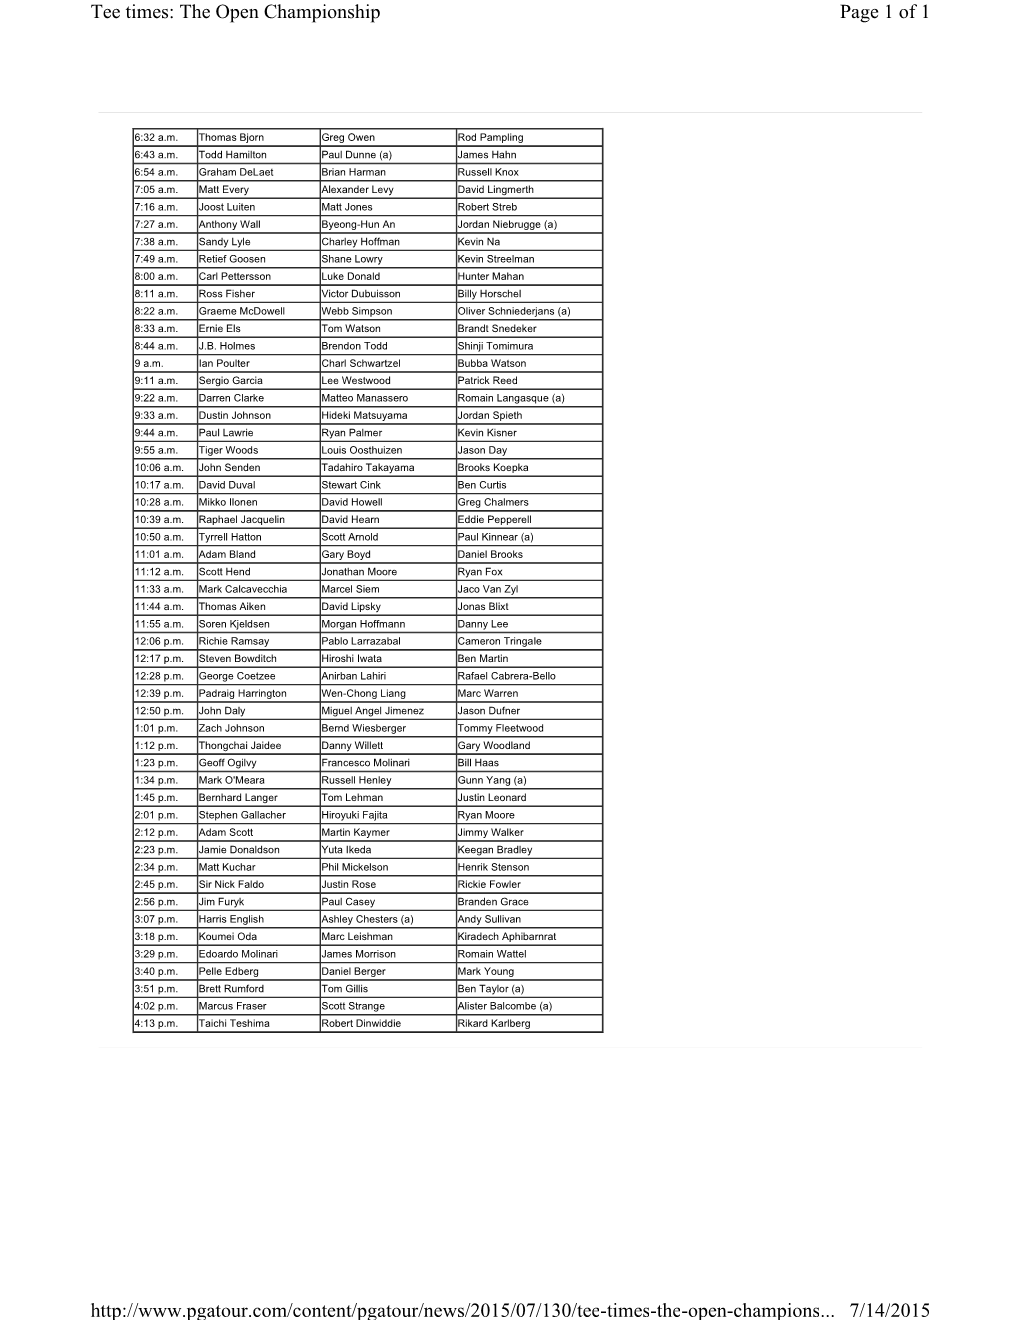 Page 1 of 1 Tee Times: the Open Championship 7/14/2015 Http